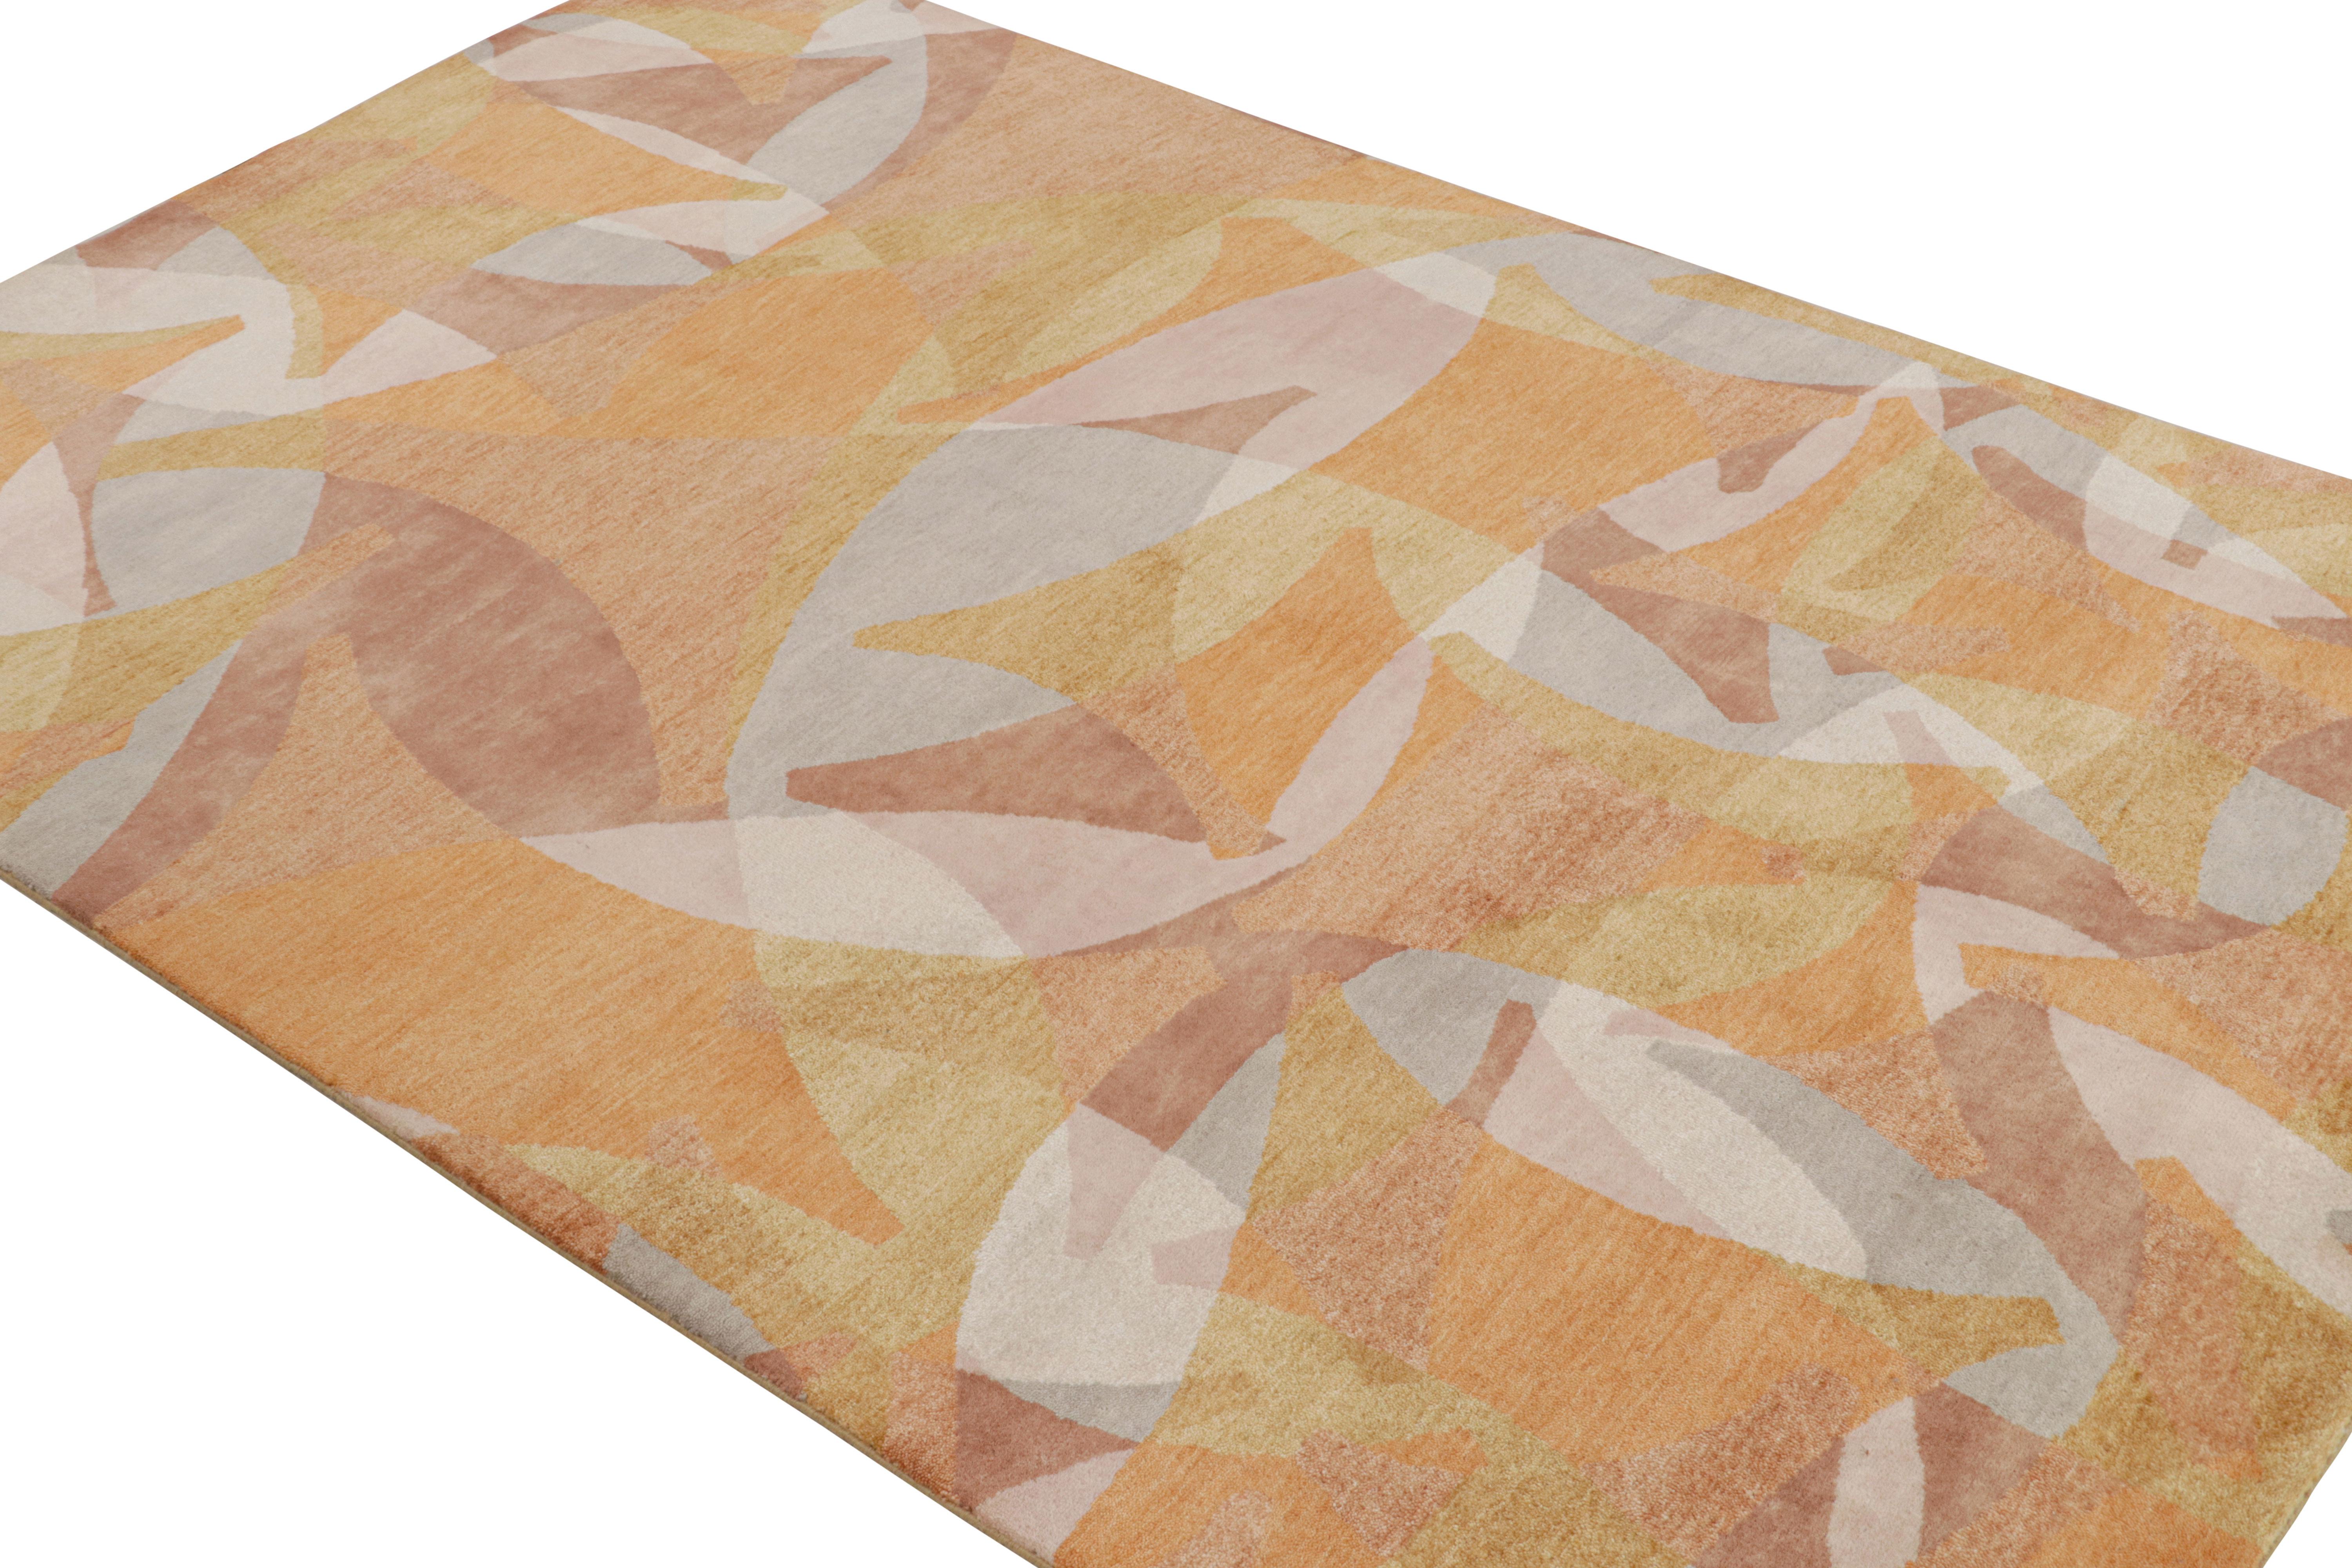 Hand-knotted in wool, natural silk and exotic yarns, this 6x9 rug is represents the Mid-Century Modern rug collection by Rug & Kilim. Its design enjoys sharp details and warm colors, with geometric patterns in the all over style.

On the design: